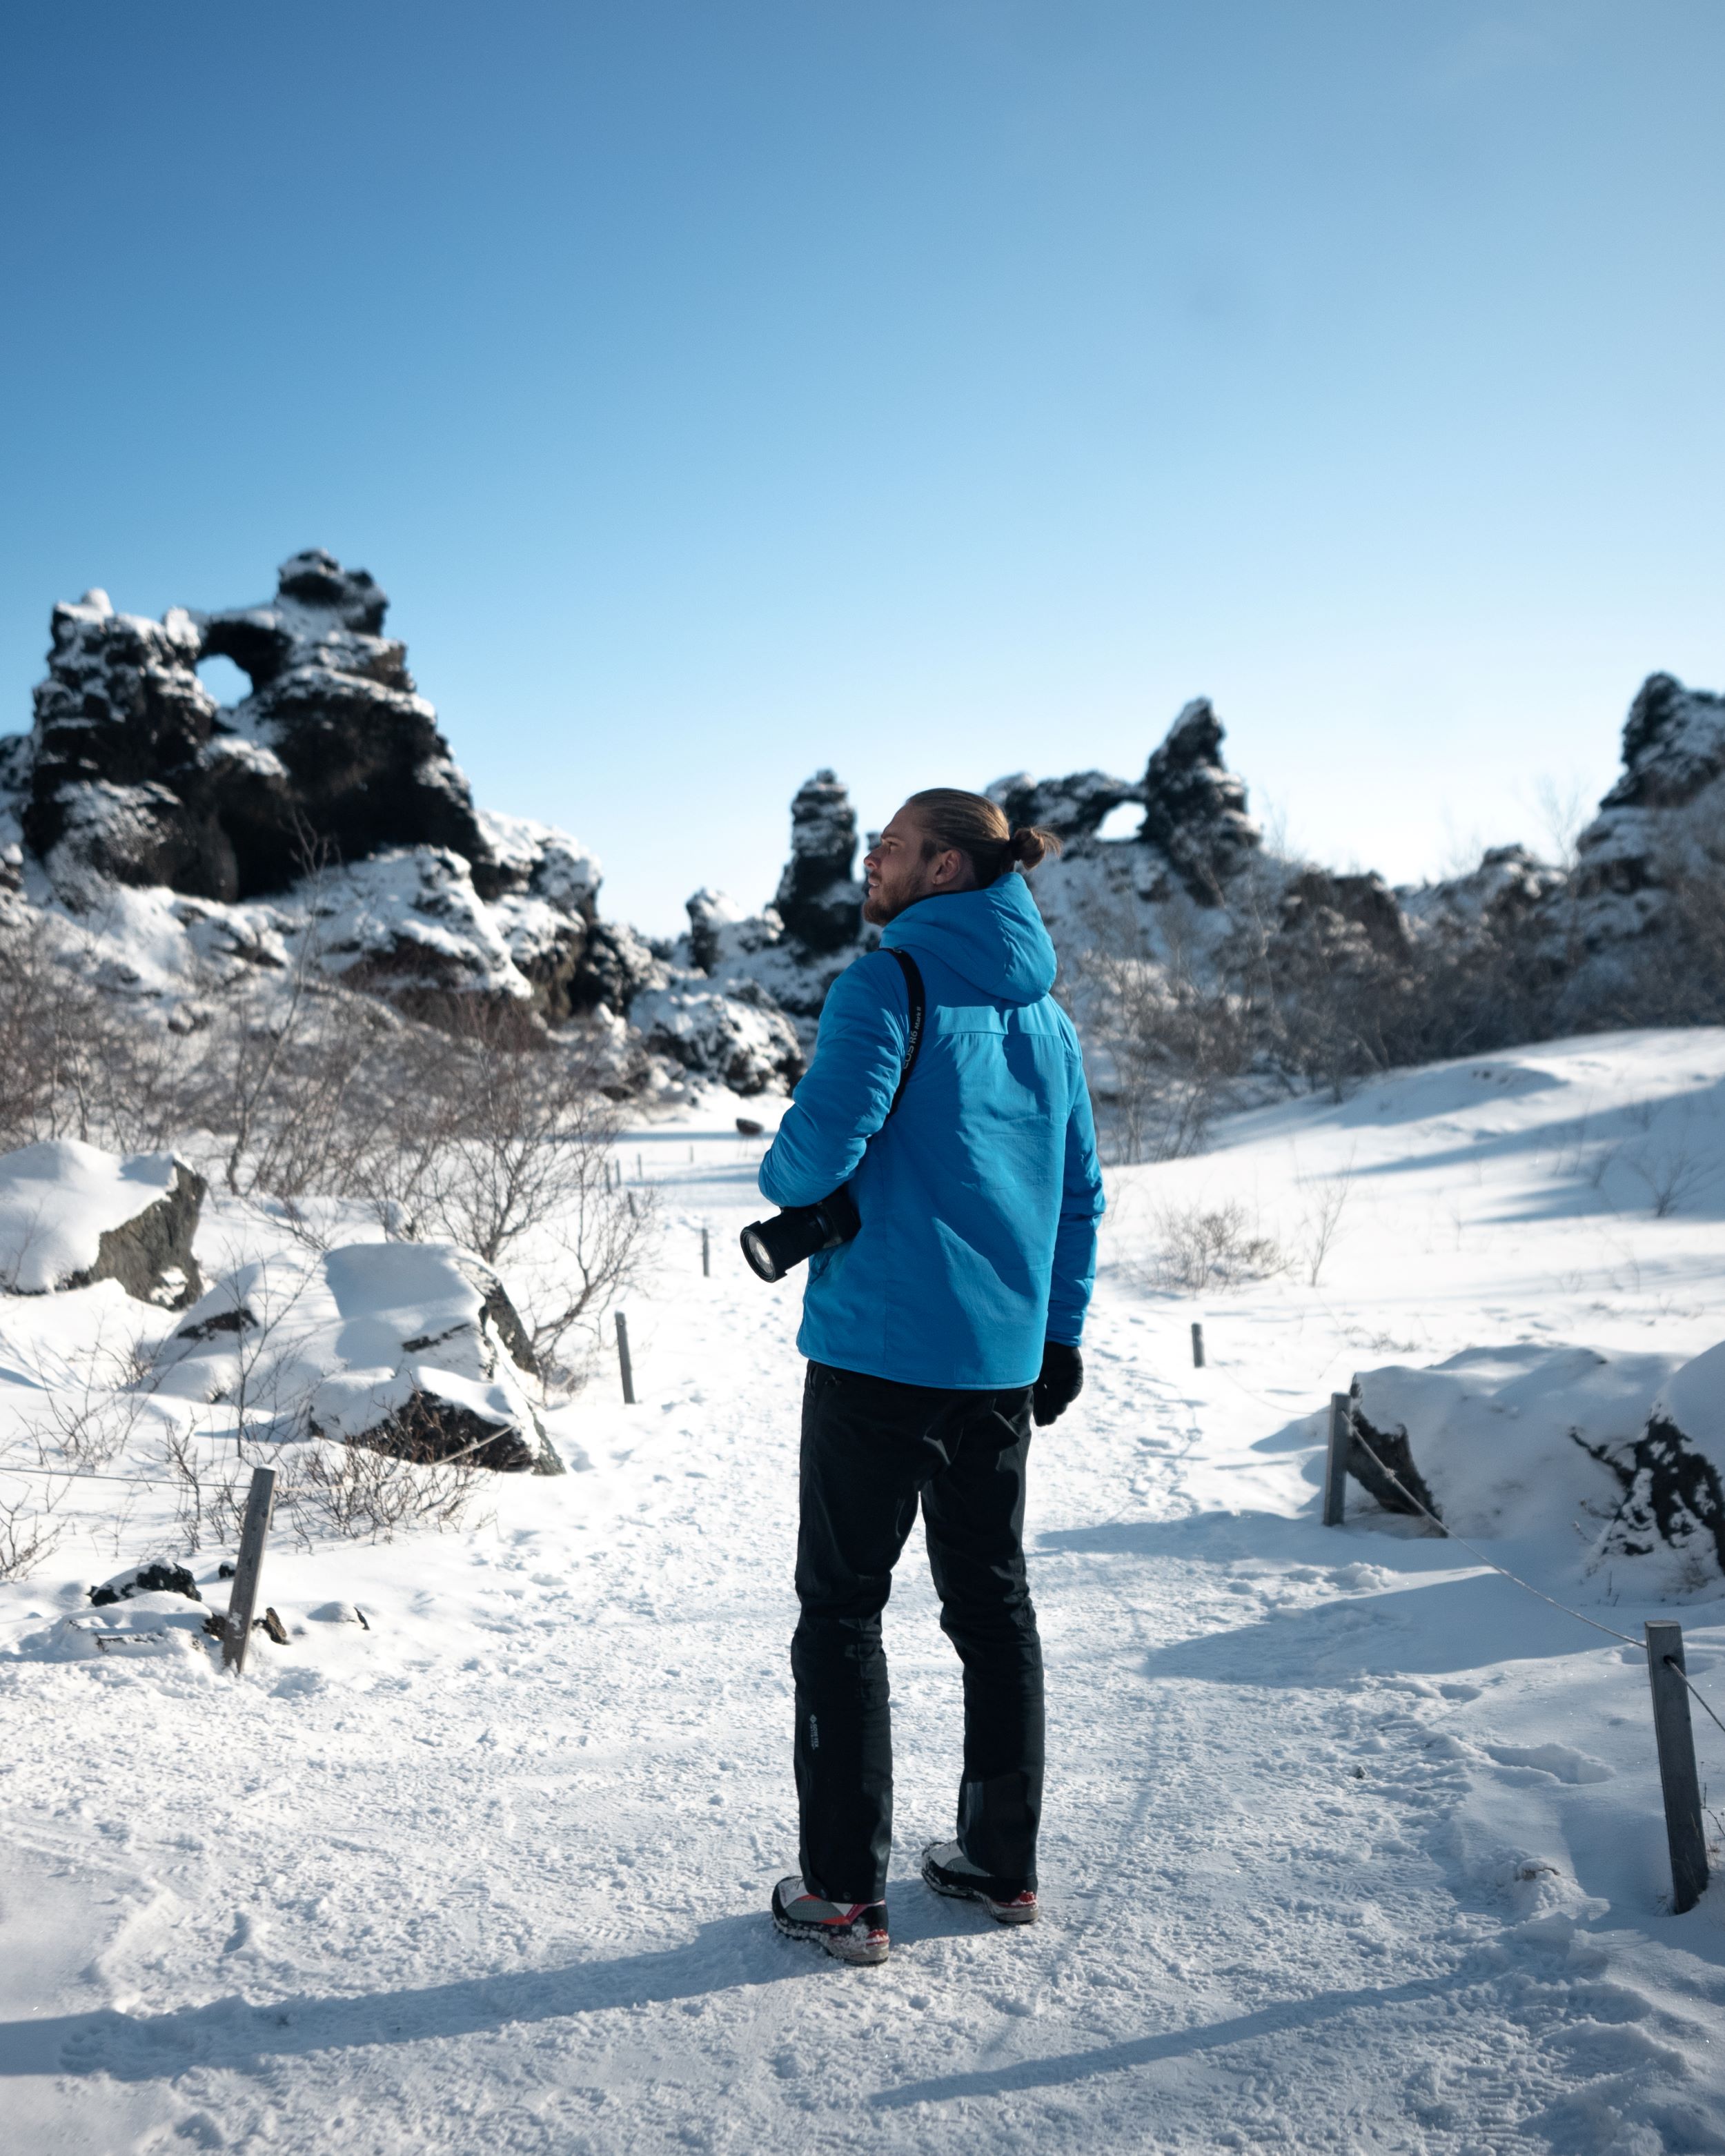 A view of Rúrik Gíslason standing on a snowy path and looking at the lava sculptures of Dimmuborgir in the Mývatn area of North Iceland.